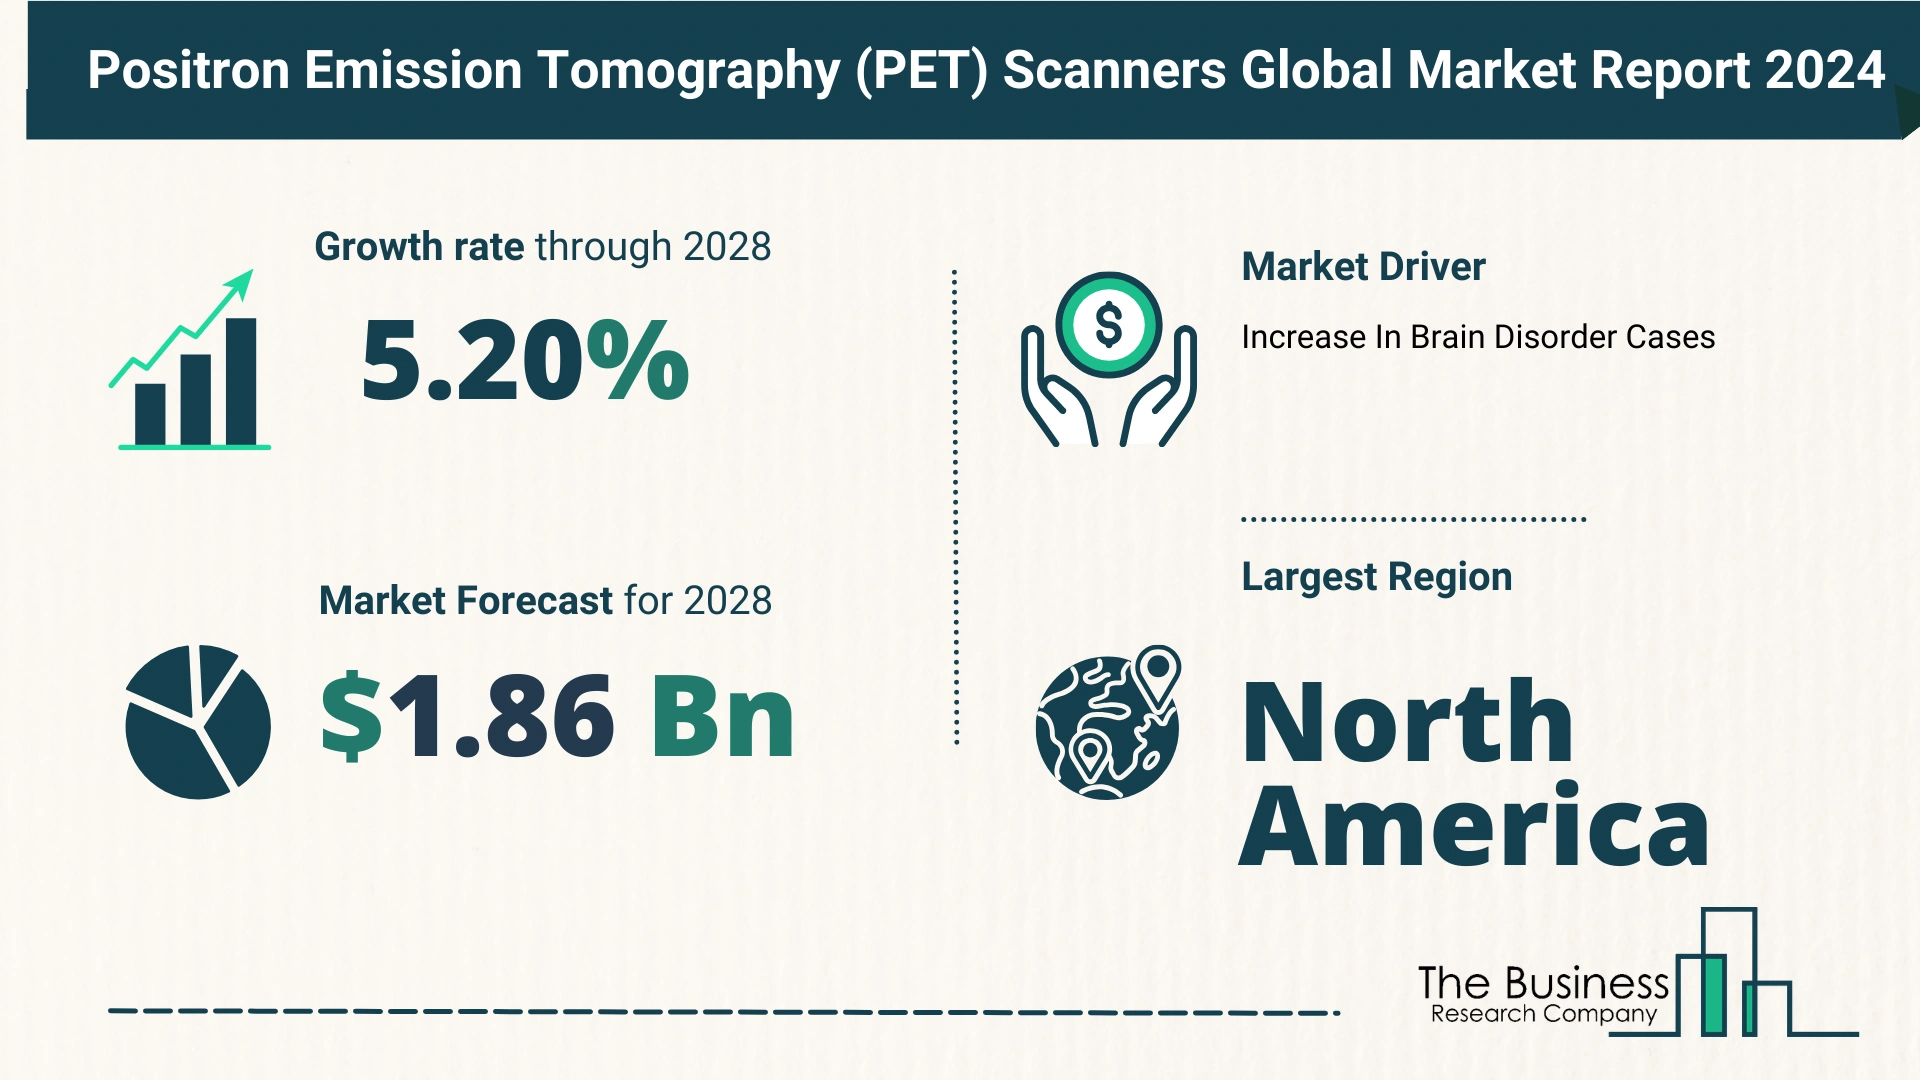 Top 5 Insights From The Positron Emission Tomography (PET) Scanners Market Report 2024